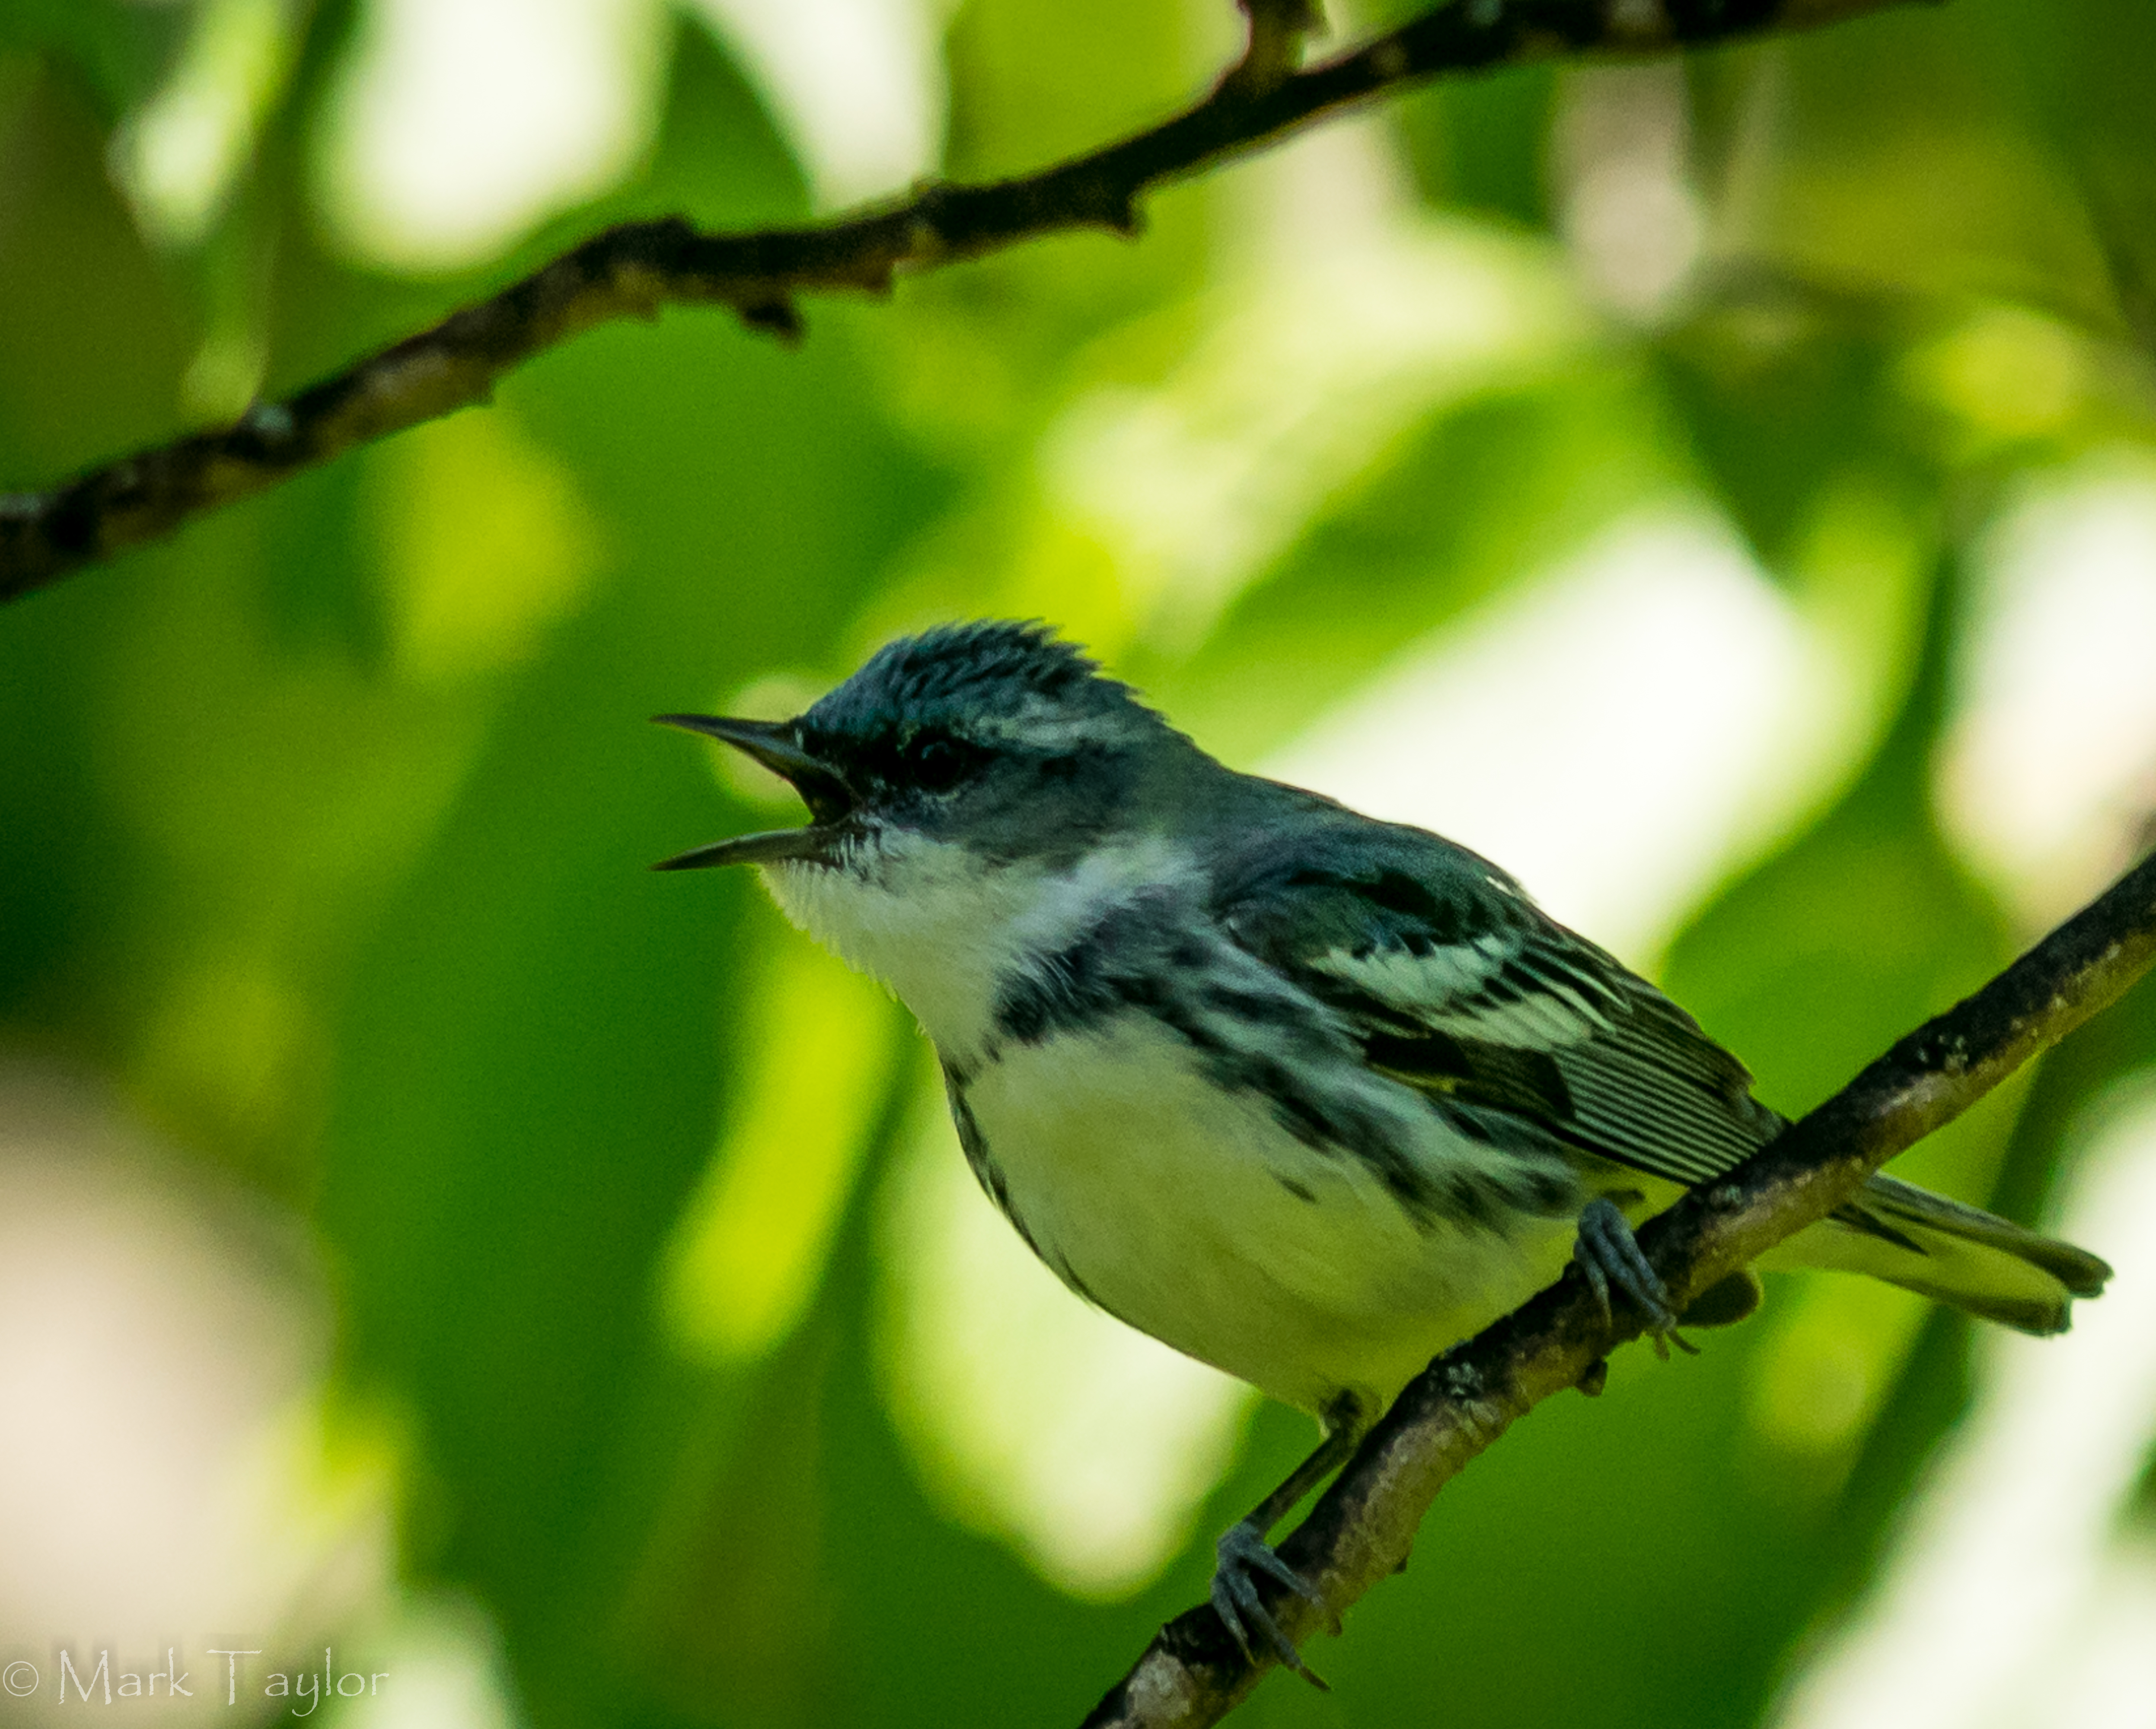 Cerulean Warbler - Photo by Mark Taylor for Randy Hedgepath